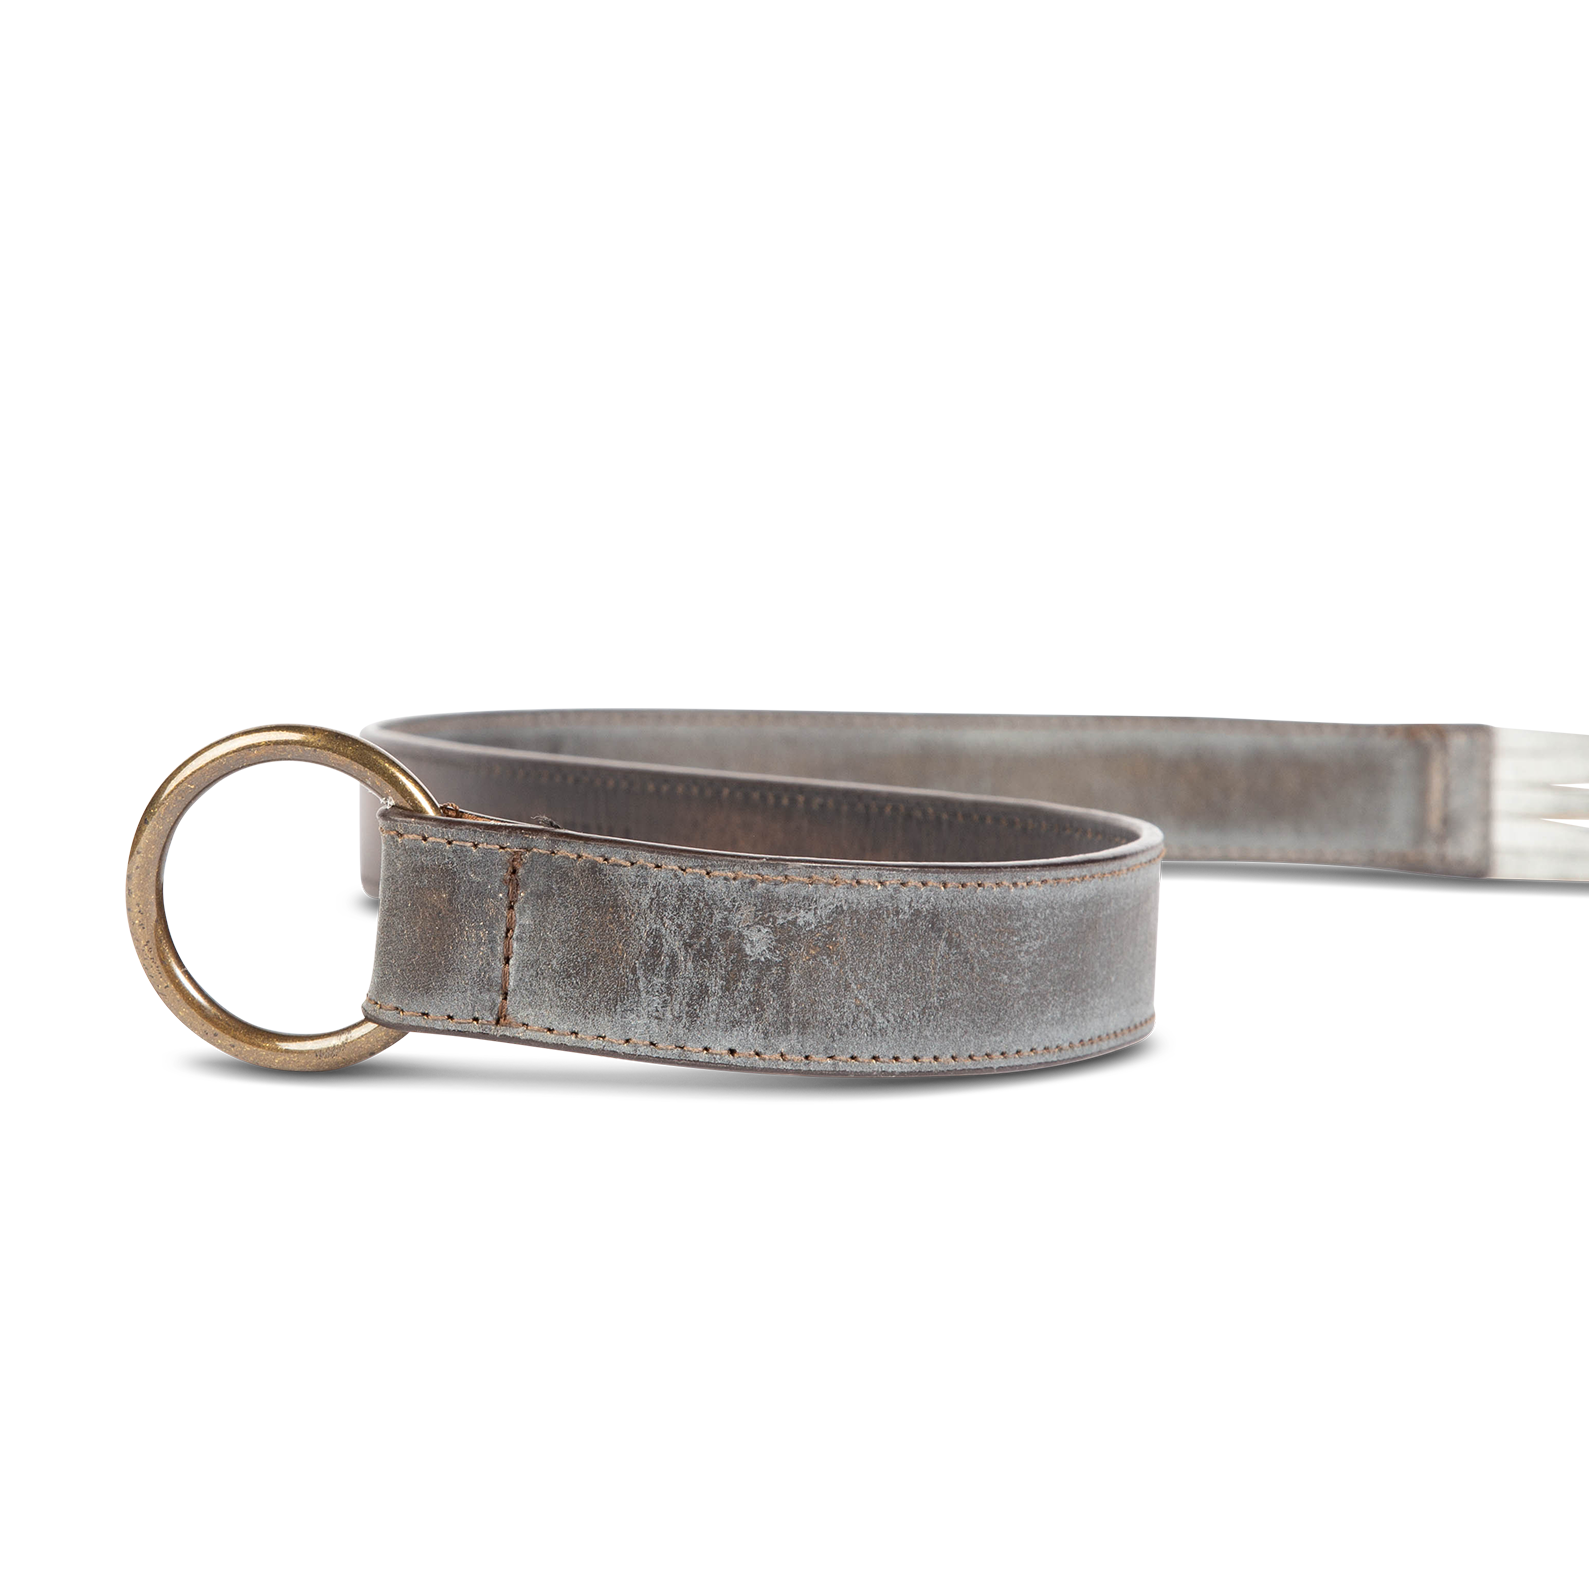 Tassel ice front view featuring full grain leather and rustic loop and tassel detailing on FREEBIRD full grain leather belt